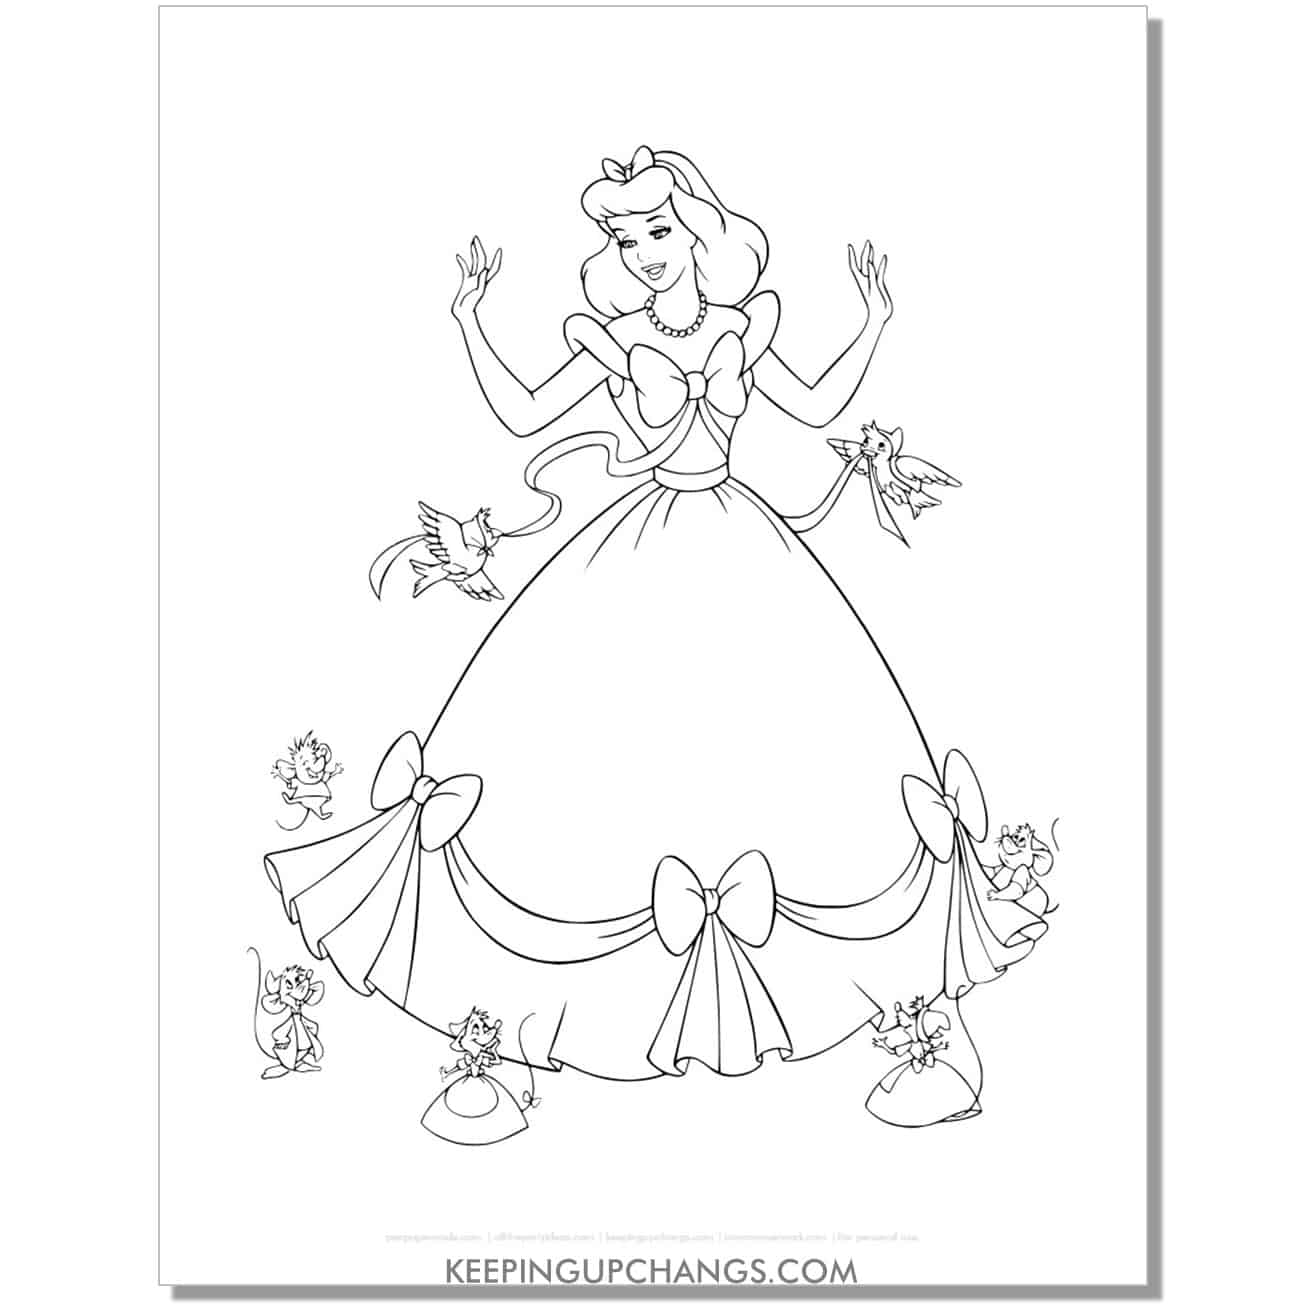 cinderella getting dress fitted by birds, mice coloring page, sheet.